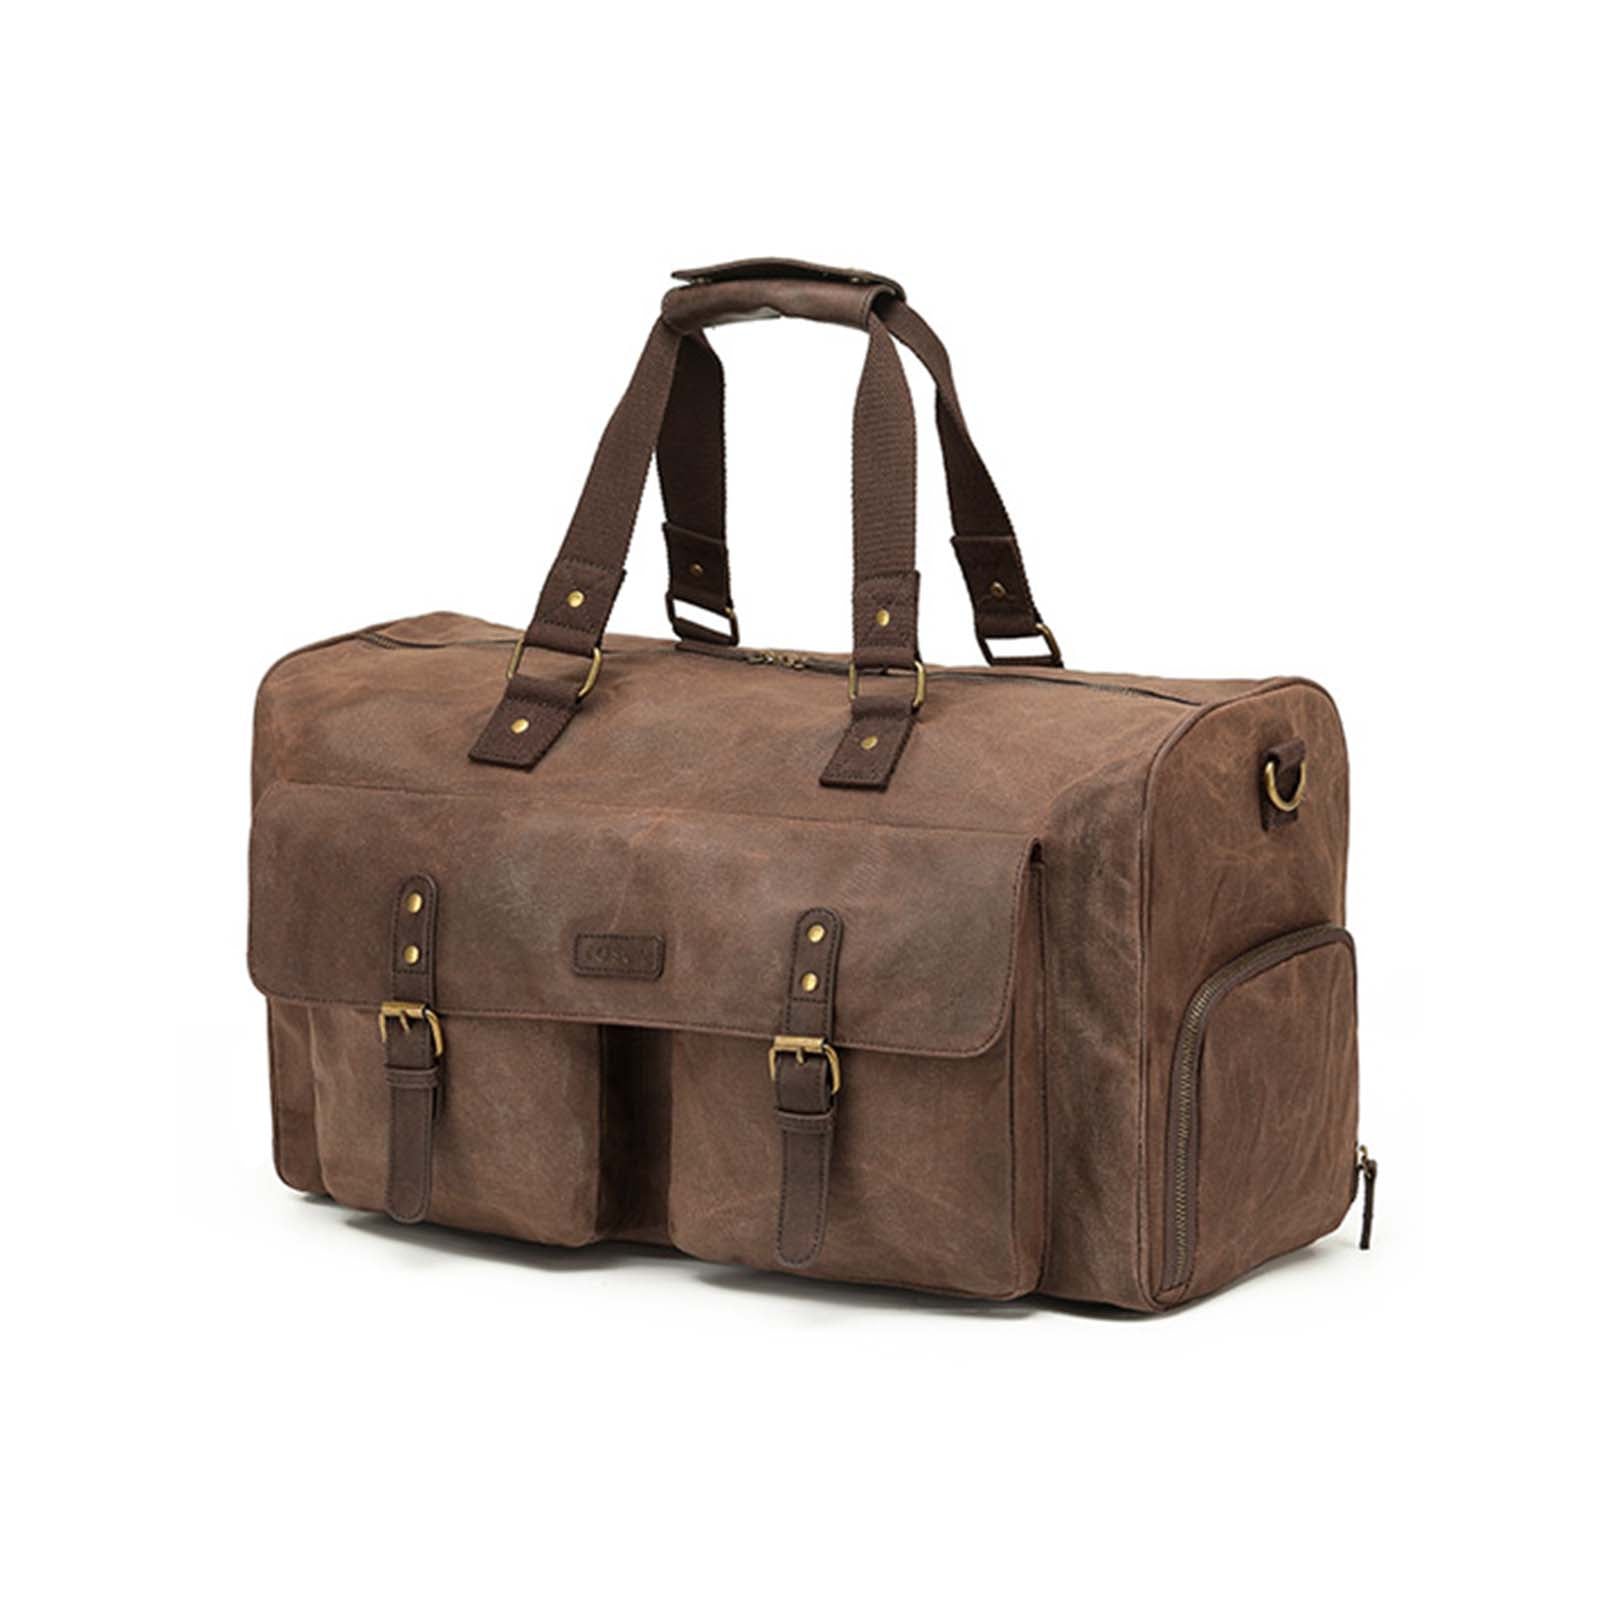 Tosca_Waxed_Canvas_Duffel_Bag_With_Pockets_Brown_Front.jpg